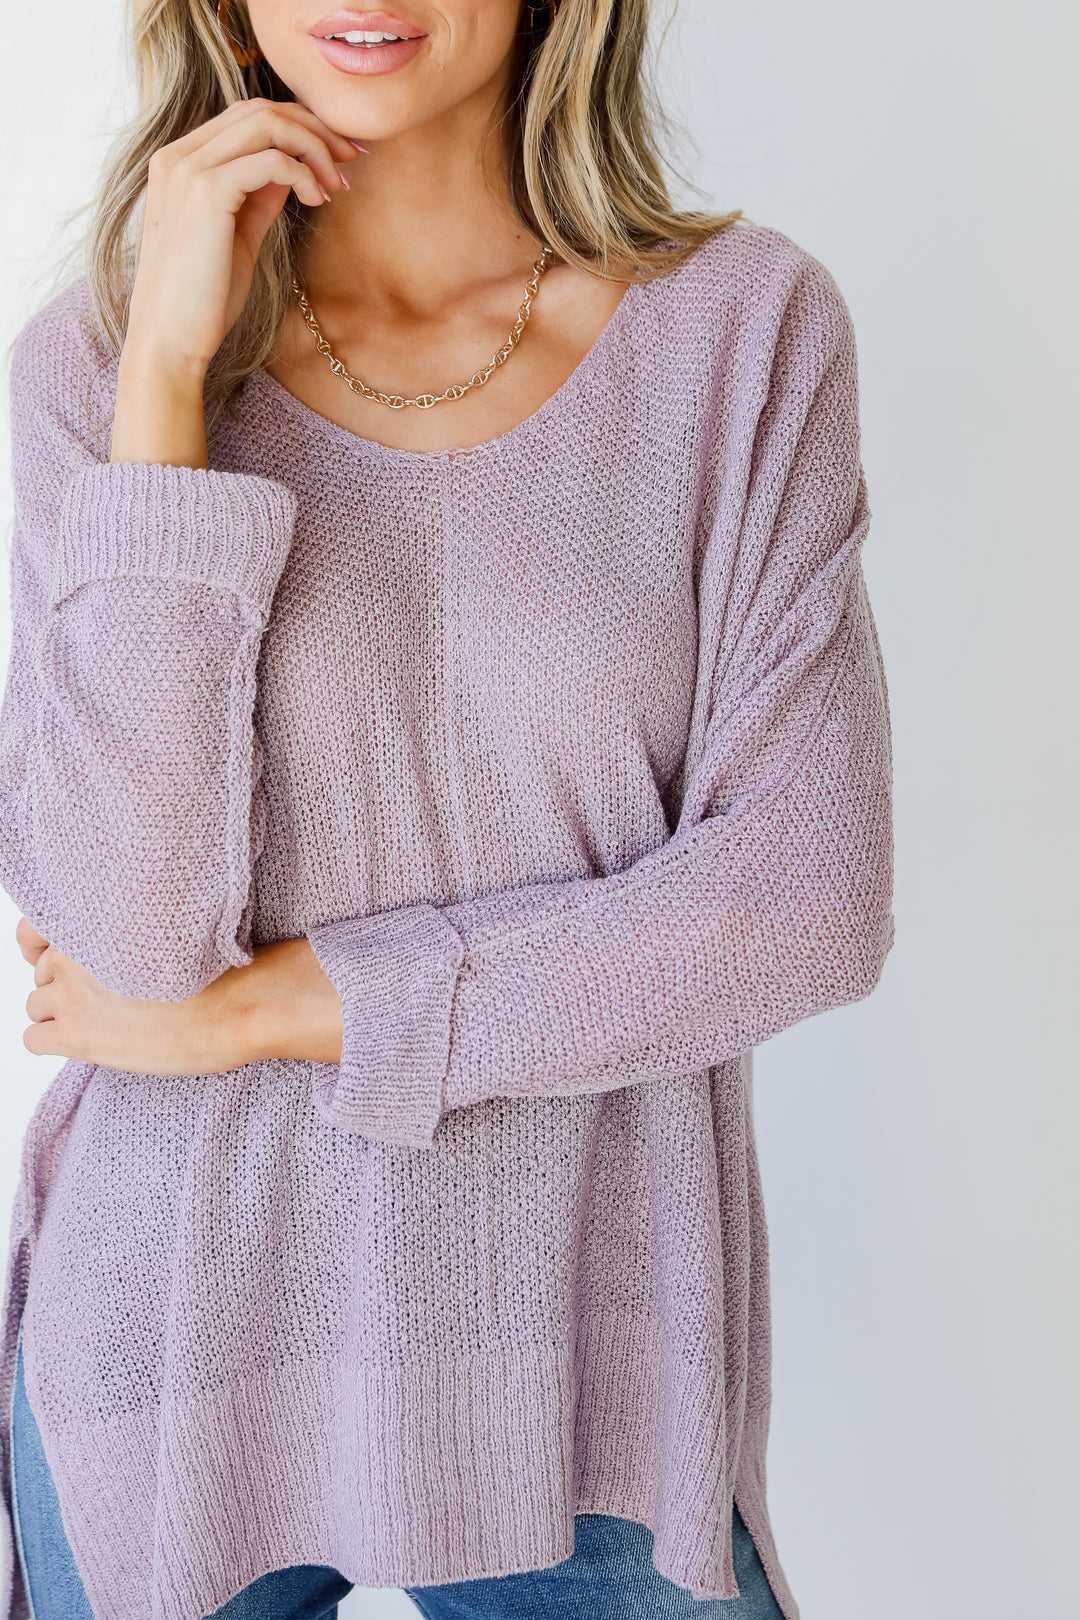 Knit Top in lavender front view